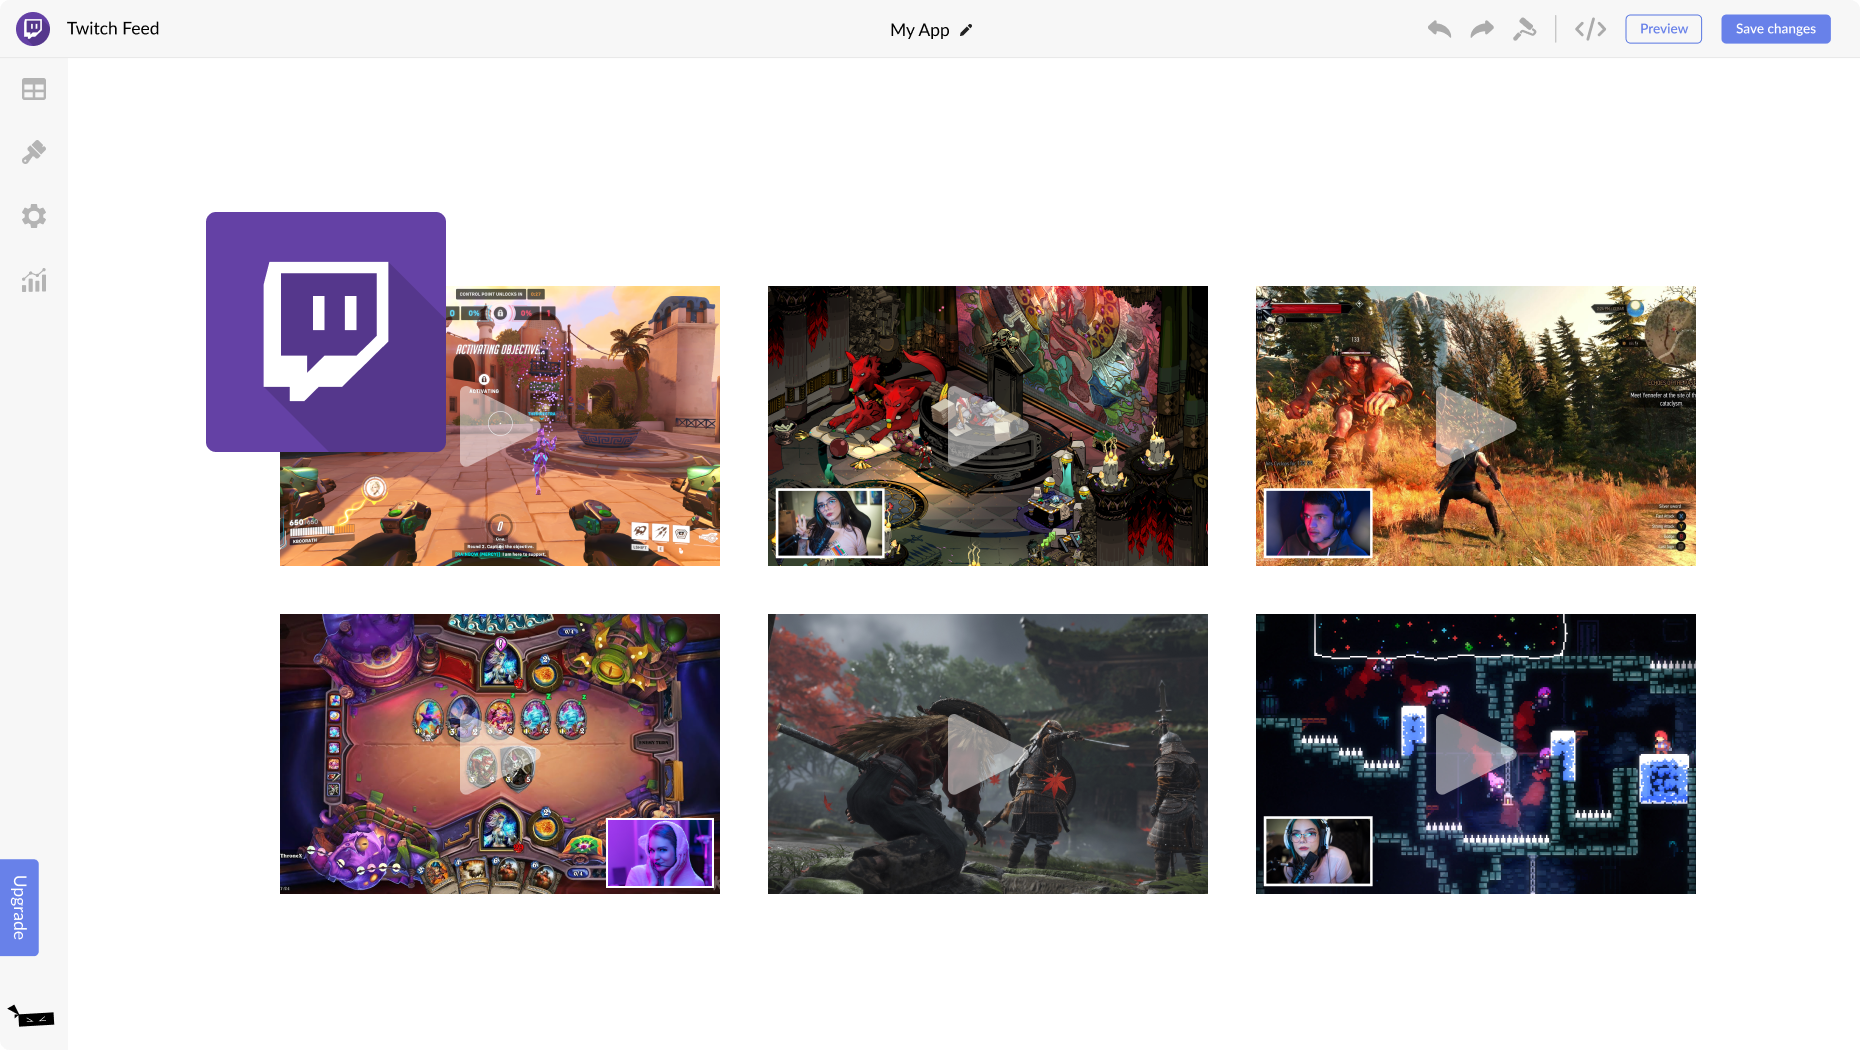 Twitch Feed for Drupal